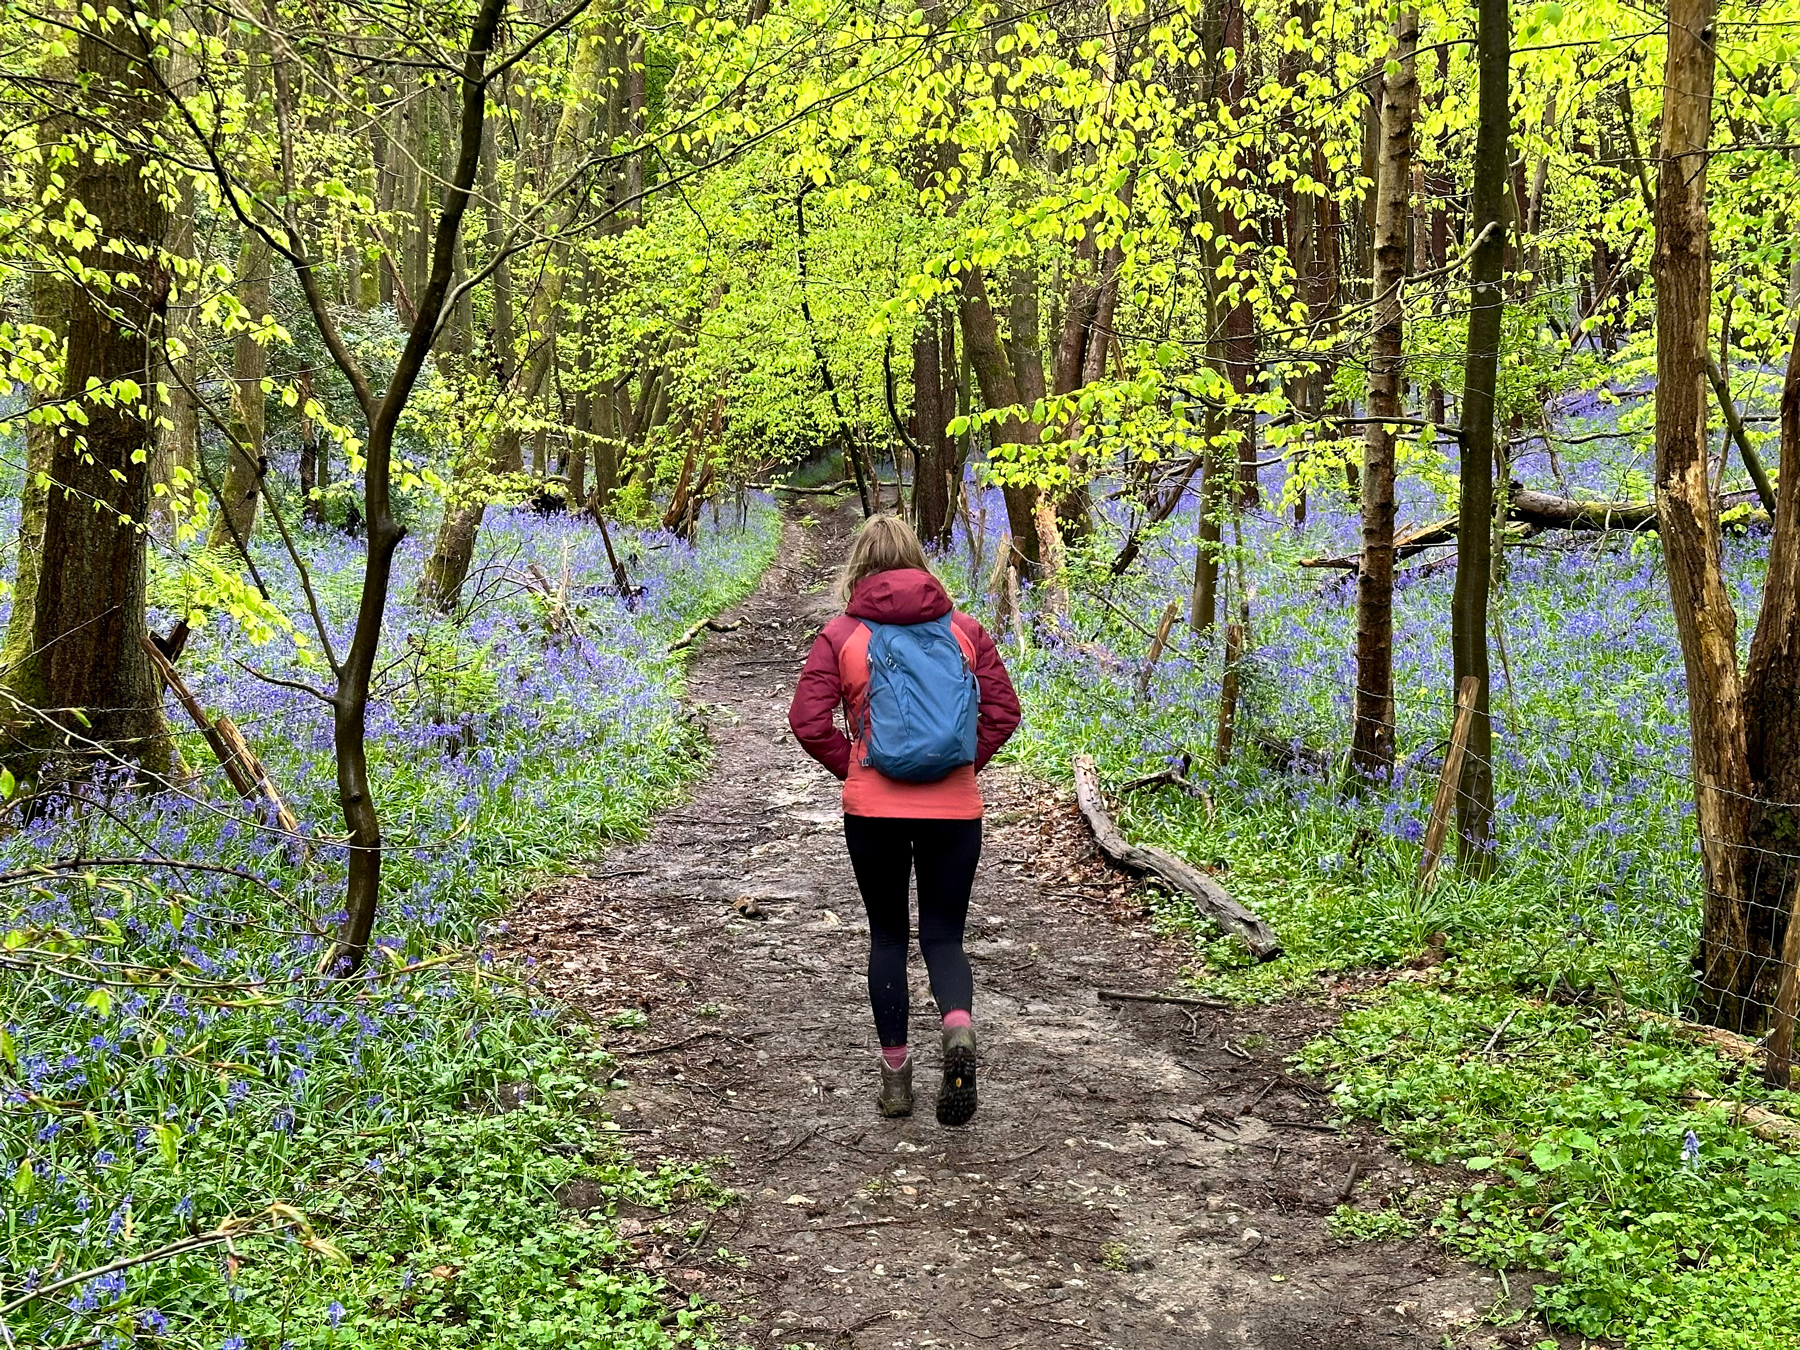 Charlotte walking through a tree tunnel with the wood around us carpeted in bluebells